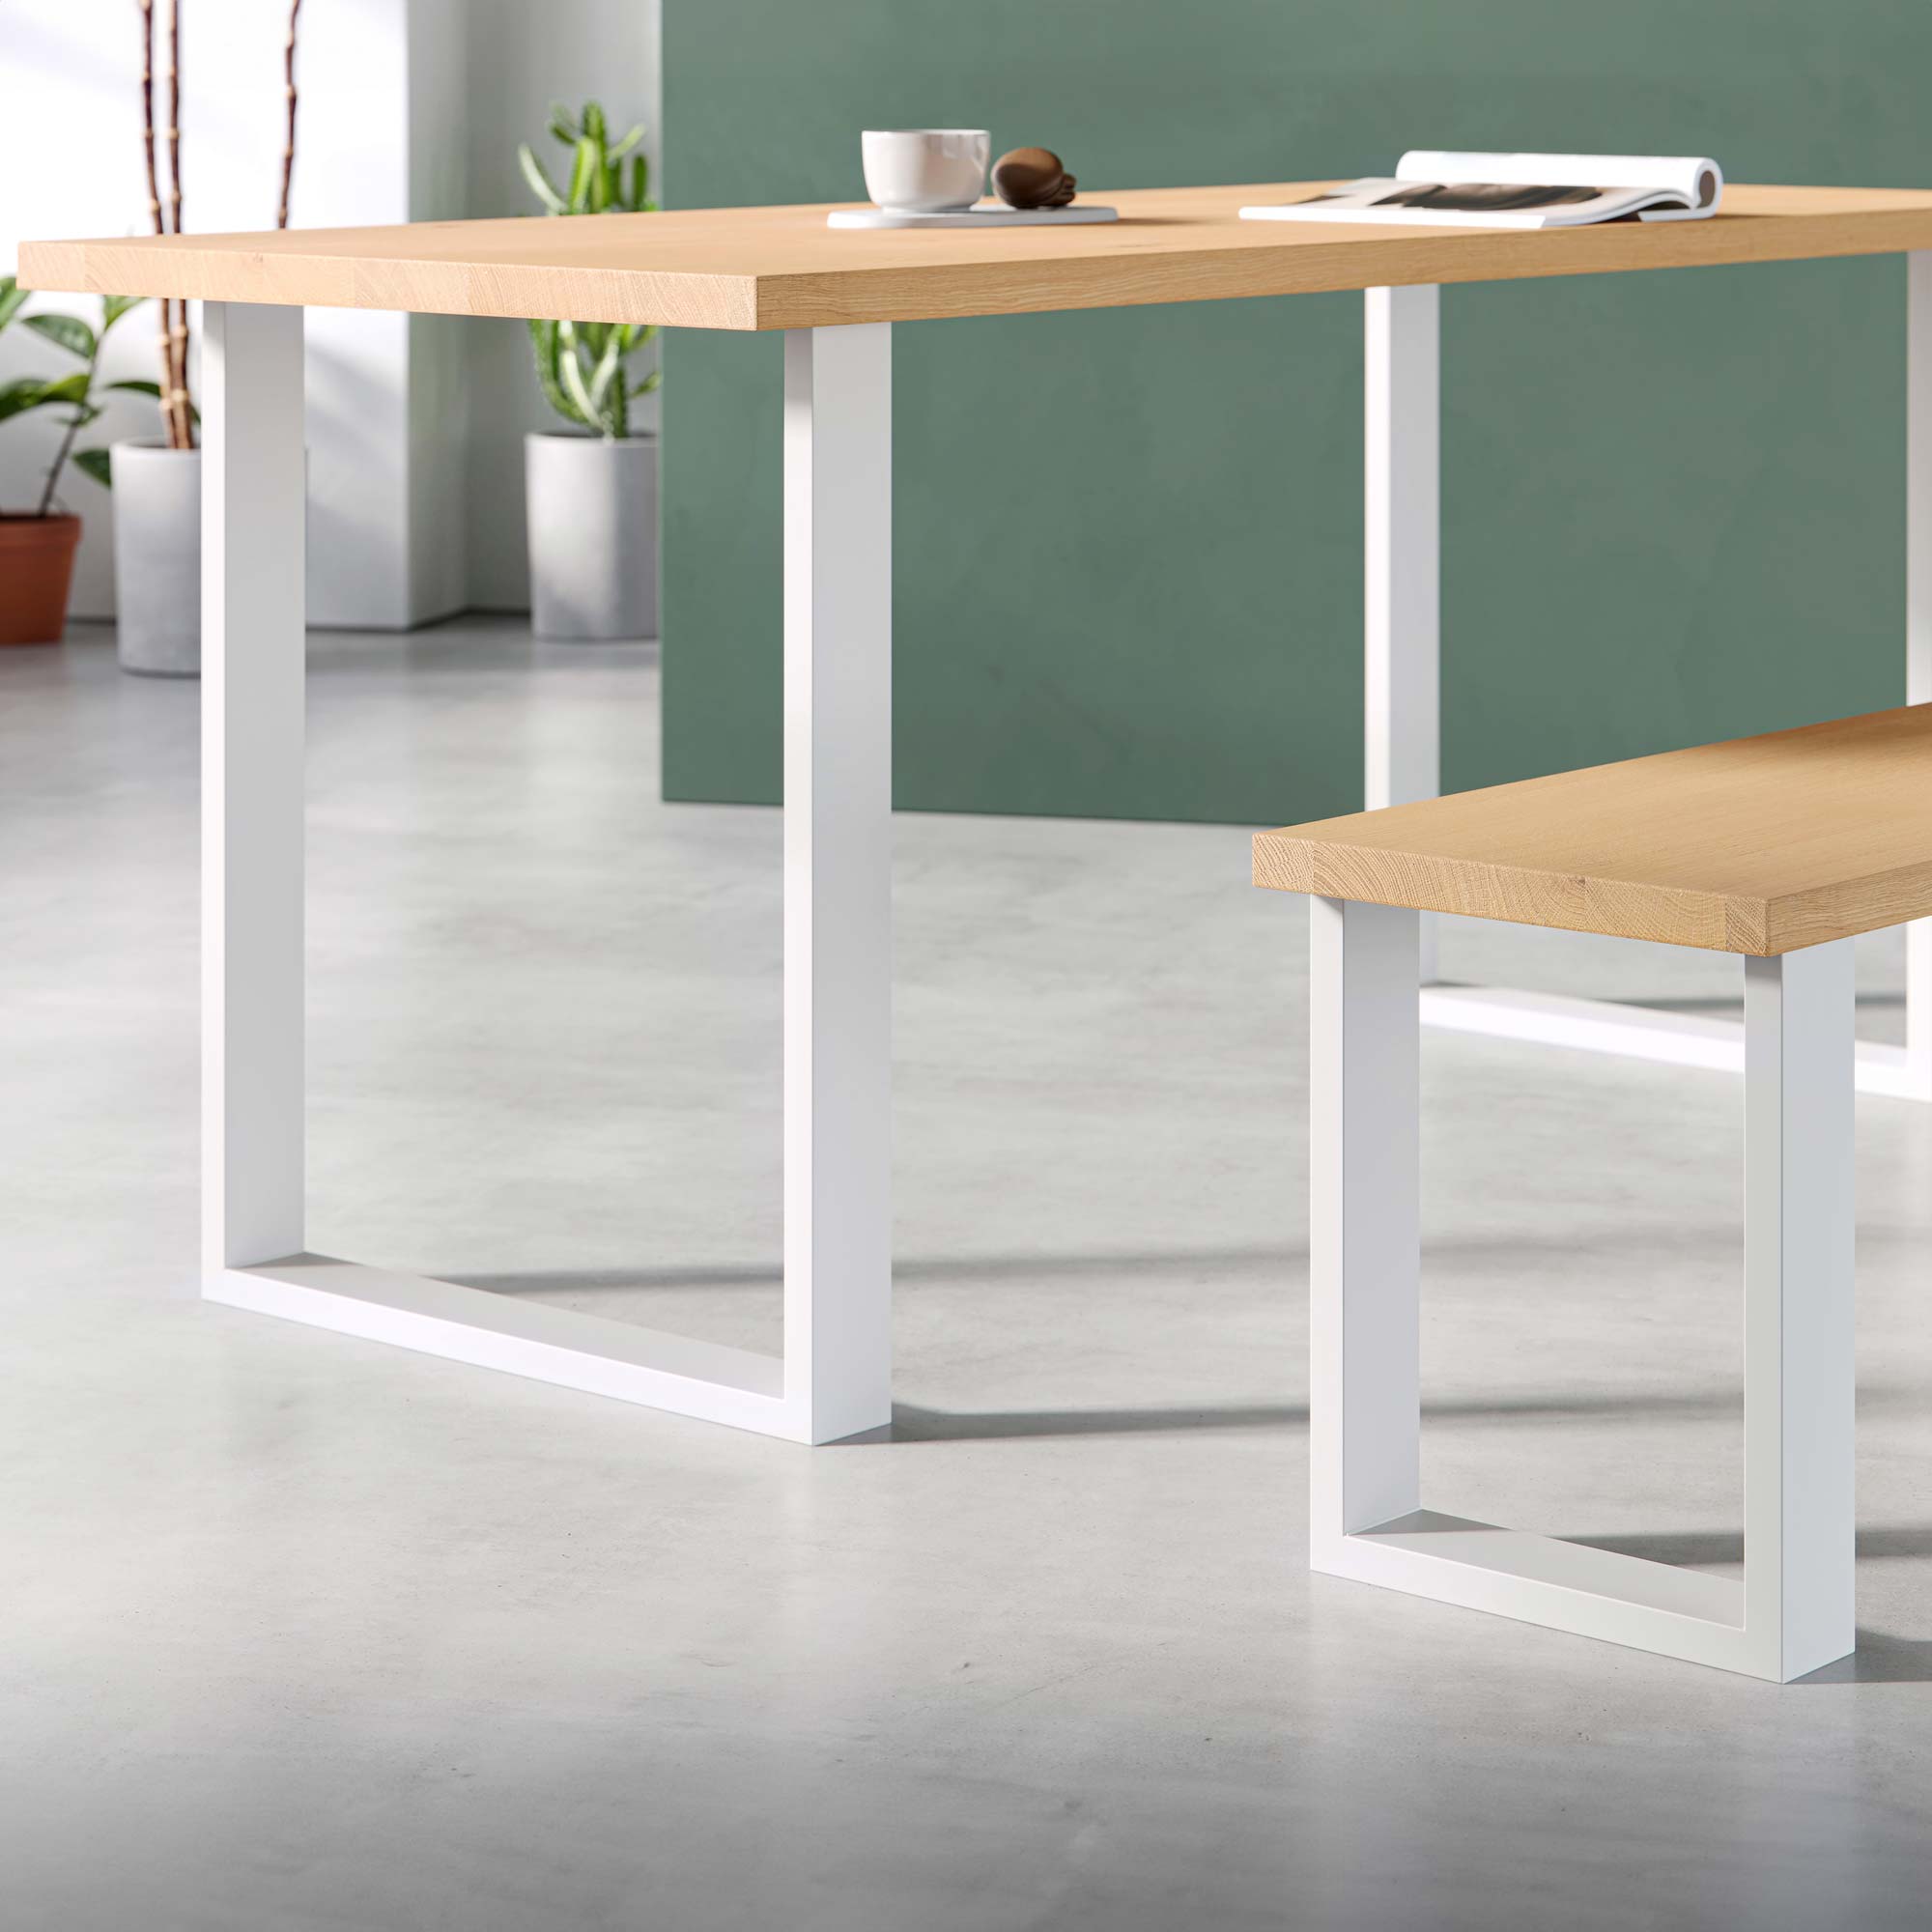 Square Industrial legs-Table (H71cm x W58cm)-White-The Hairpin Leg Co.